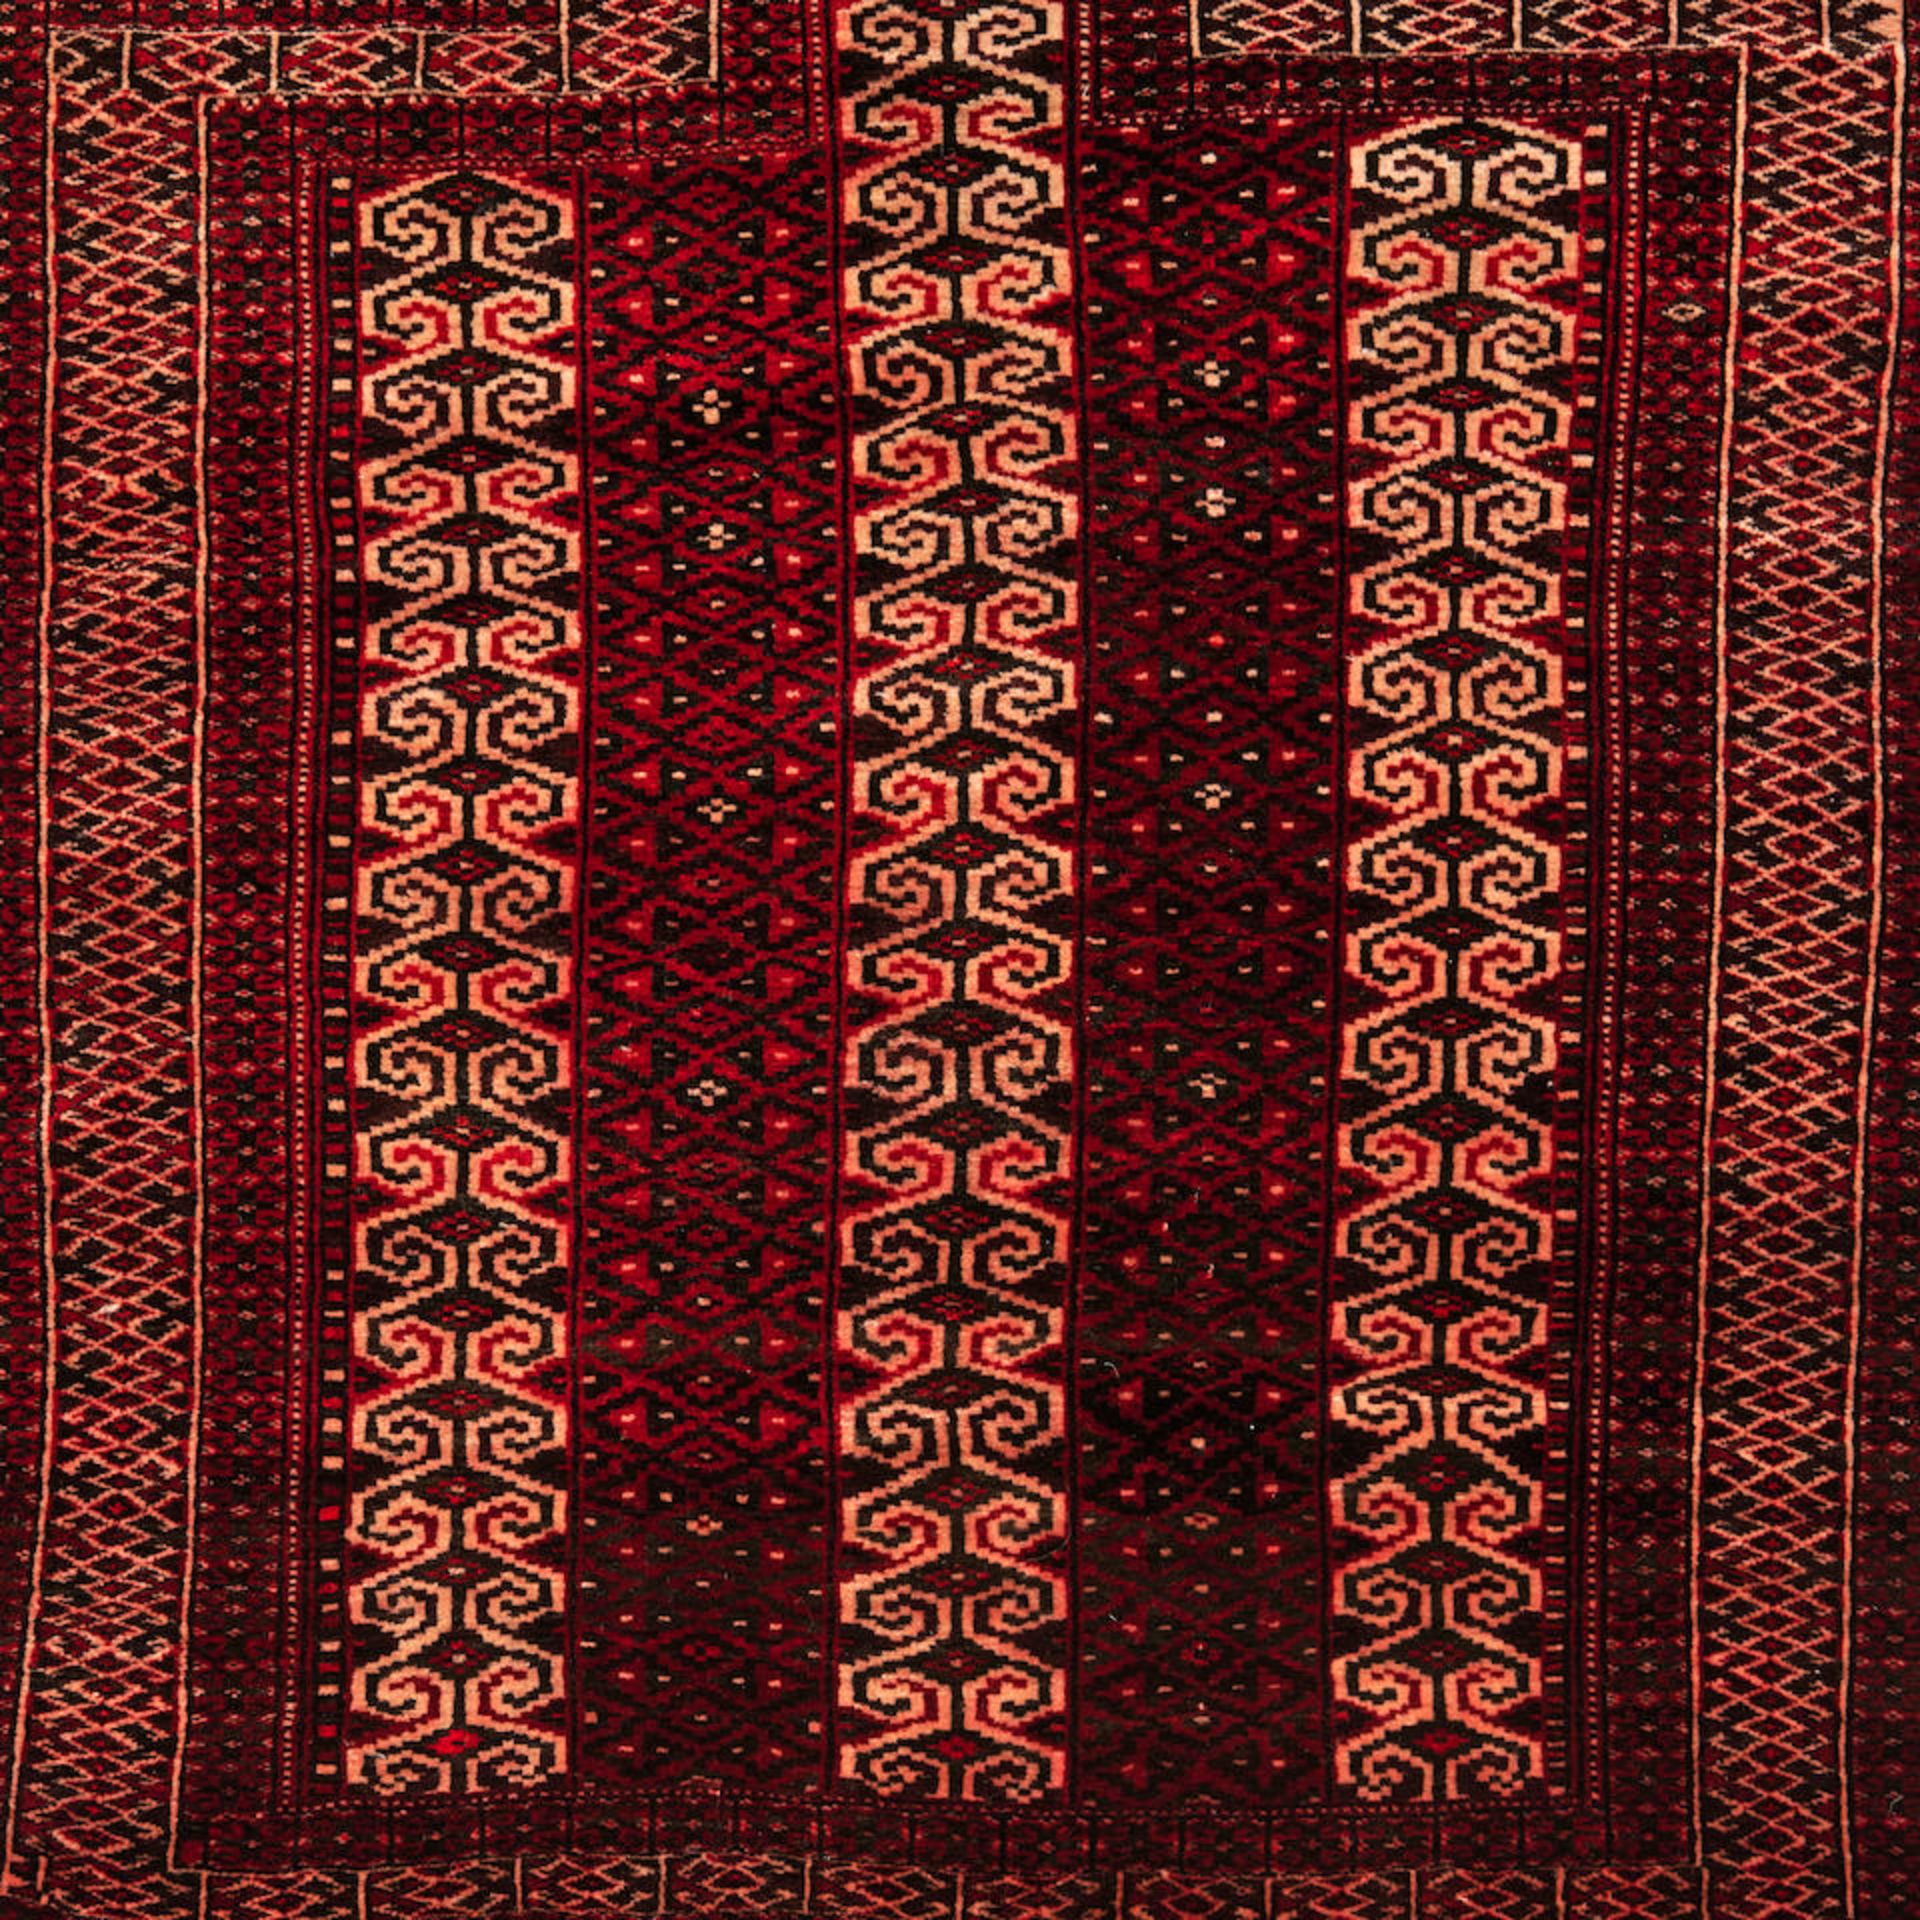 Turkoman Horse Cover - Image 3 of 3